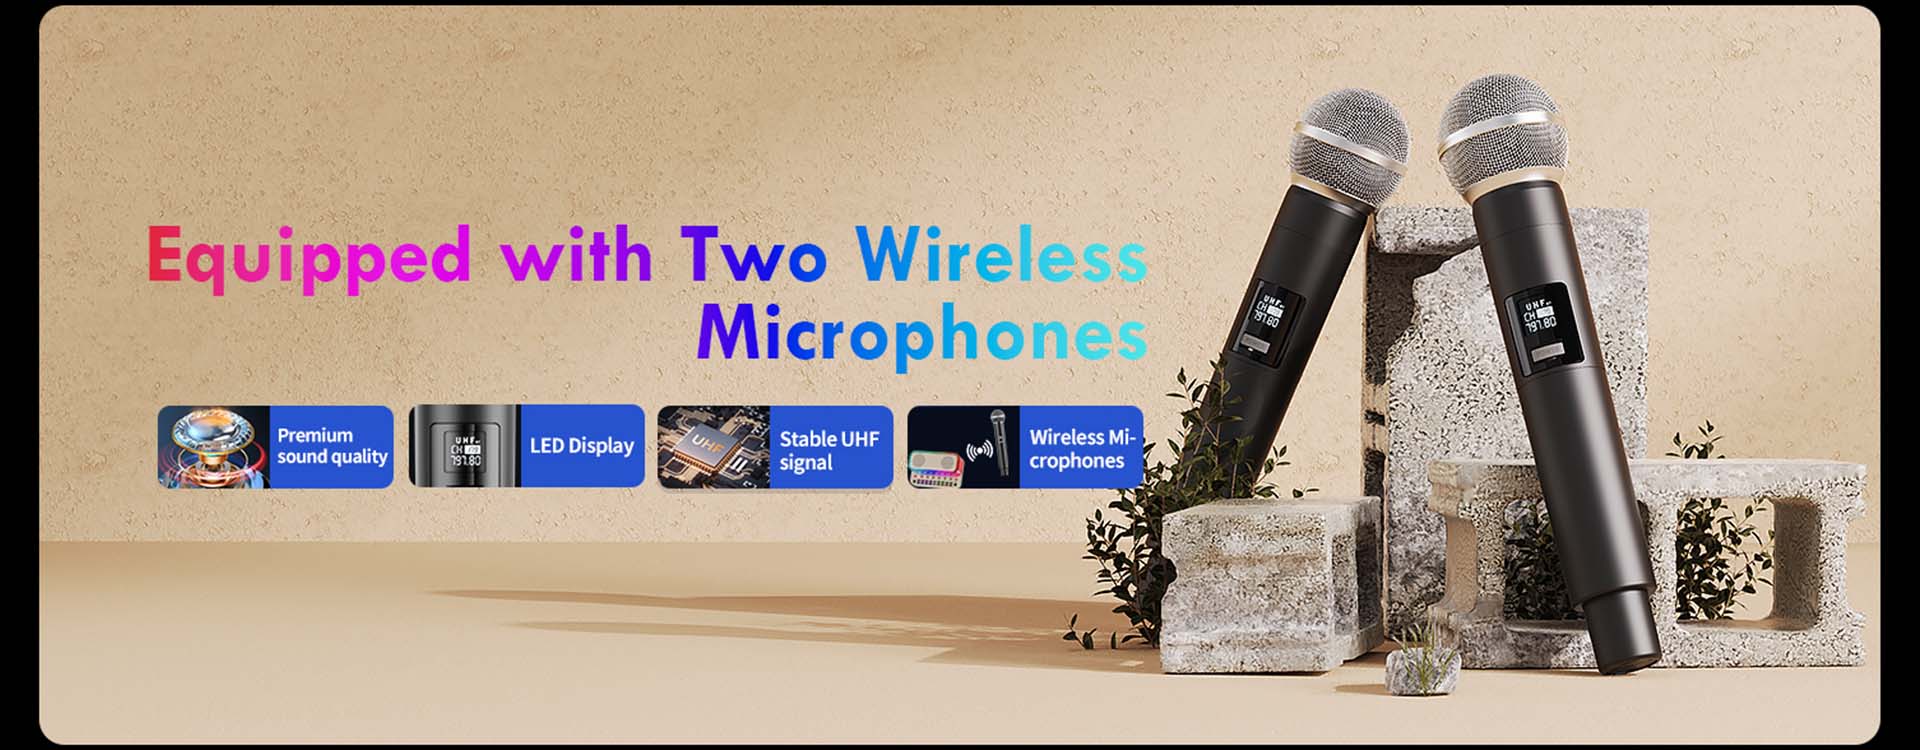 JYX S1 wireless karaoke machine with 2 microphones. Premium sound quality, LED display, and stable UHF signal.